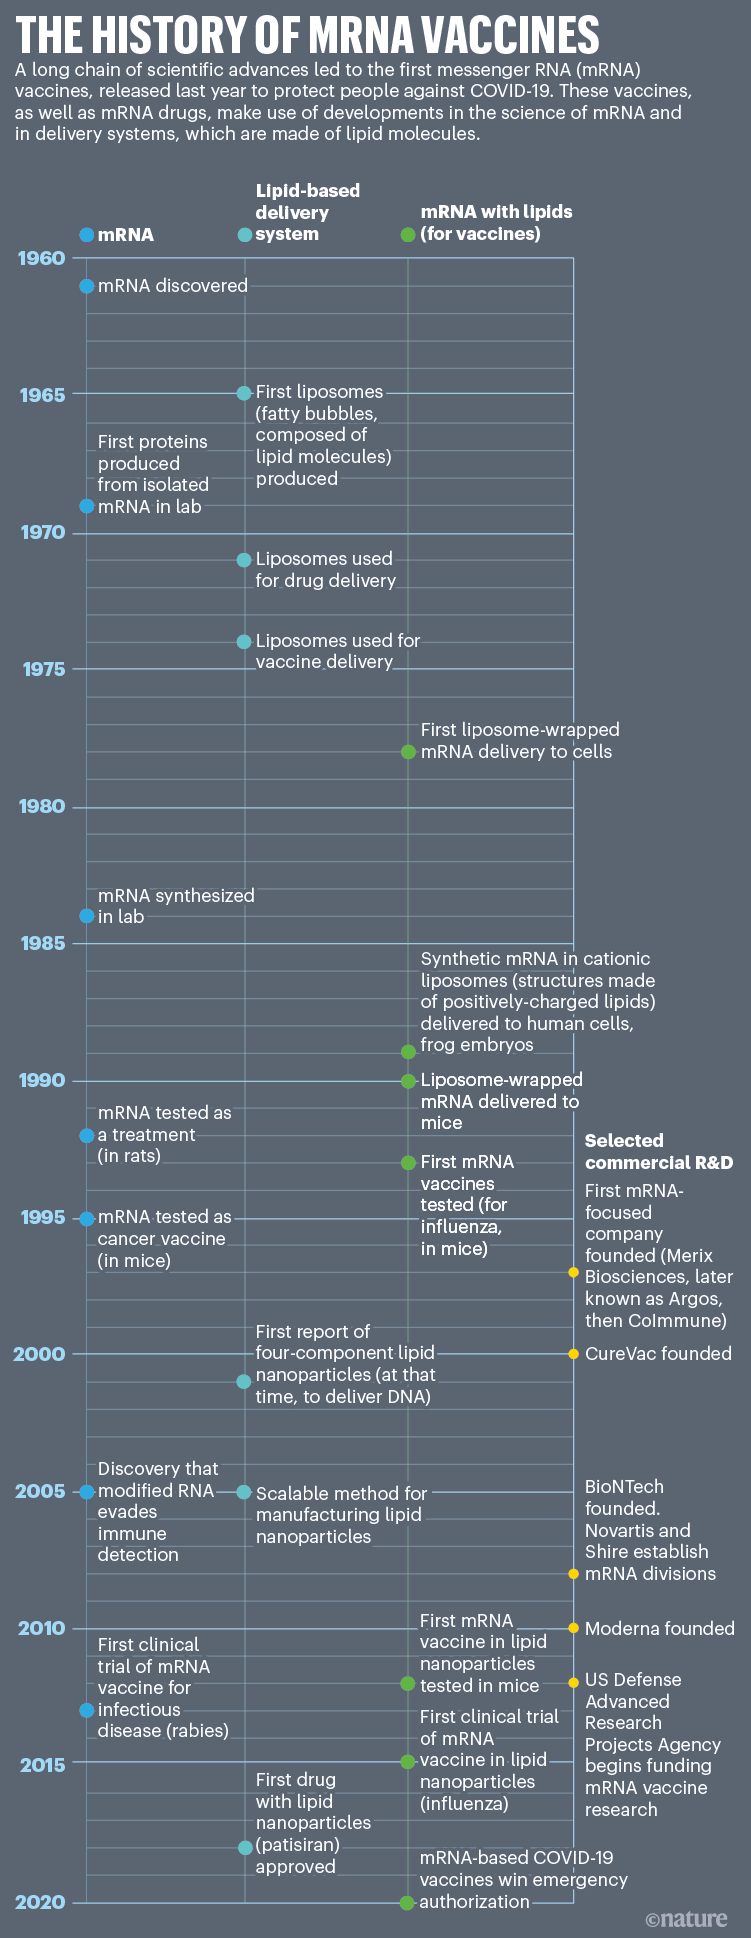 The history of mRNA vaccines: A timeline that shows the key scientific innovations in the development of mRNA vaccines.